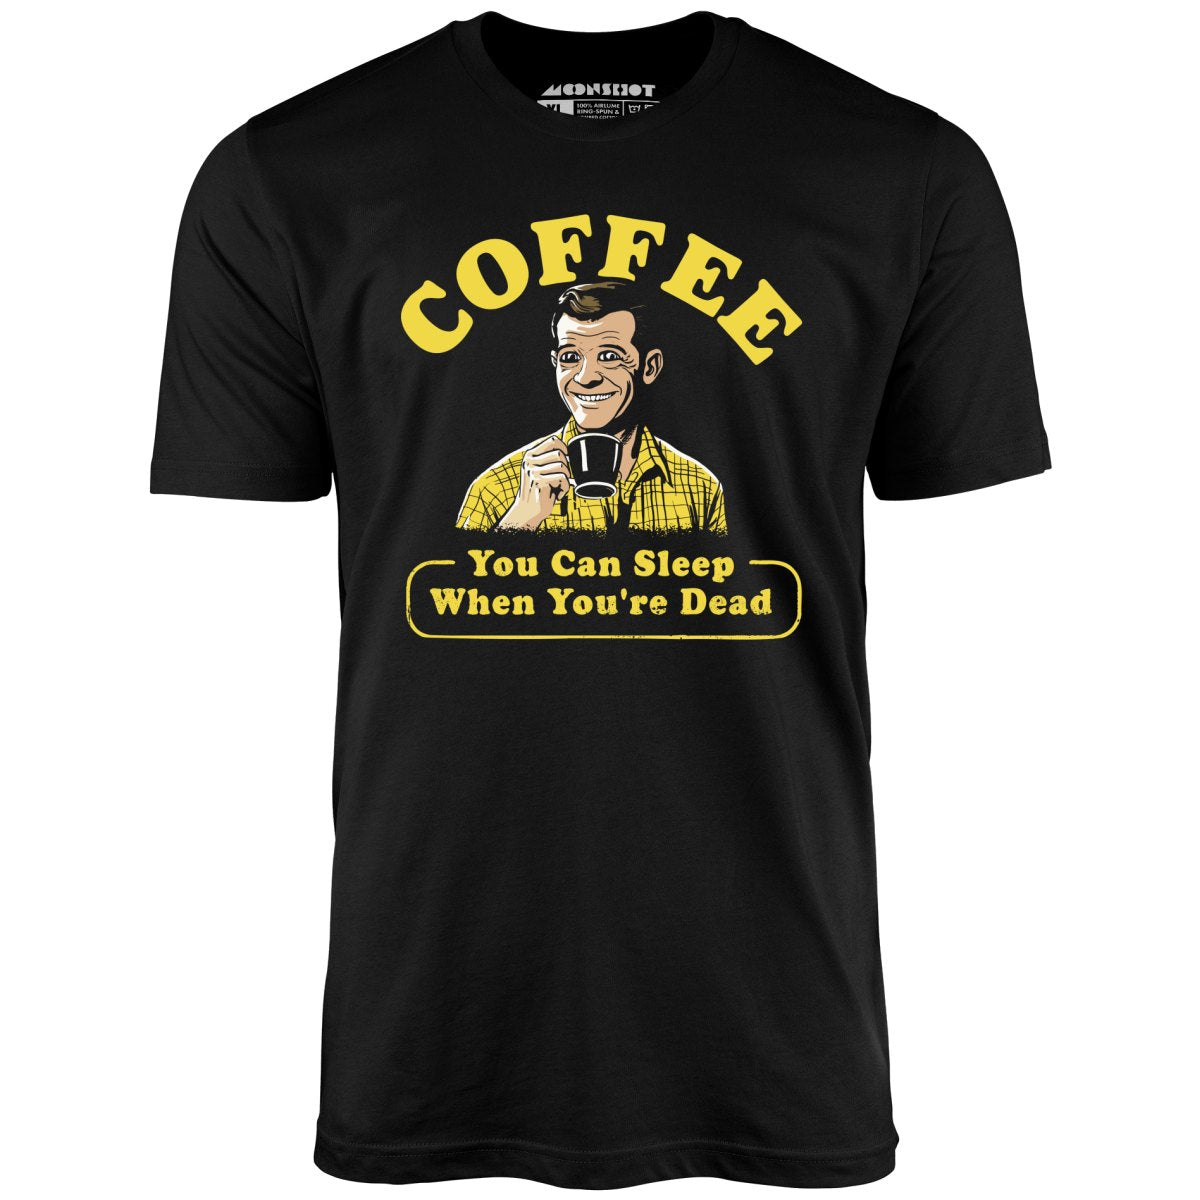 Coffee - You Can Sleep When You're Dead - Unisex T-Shirt